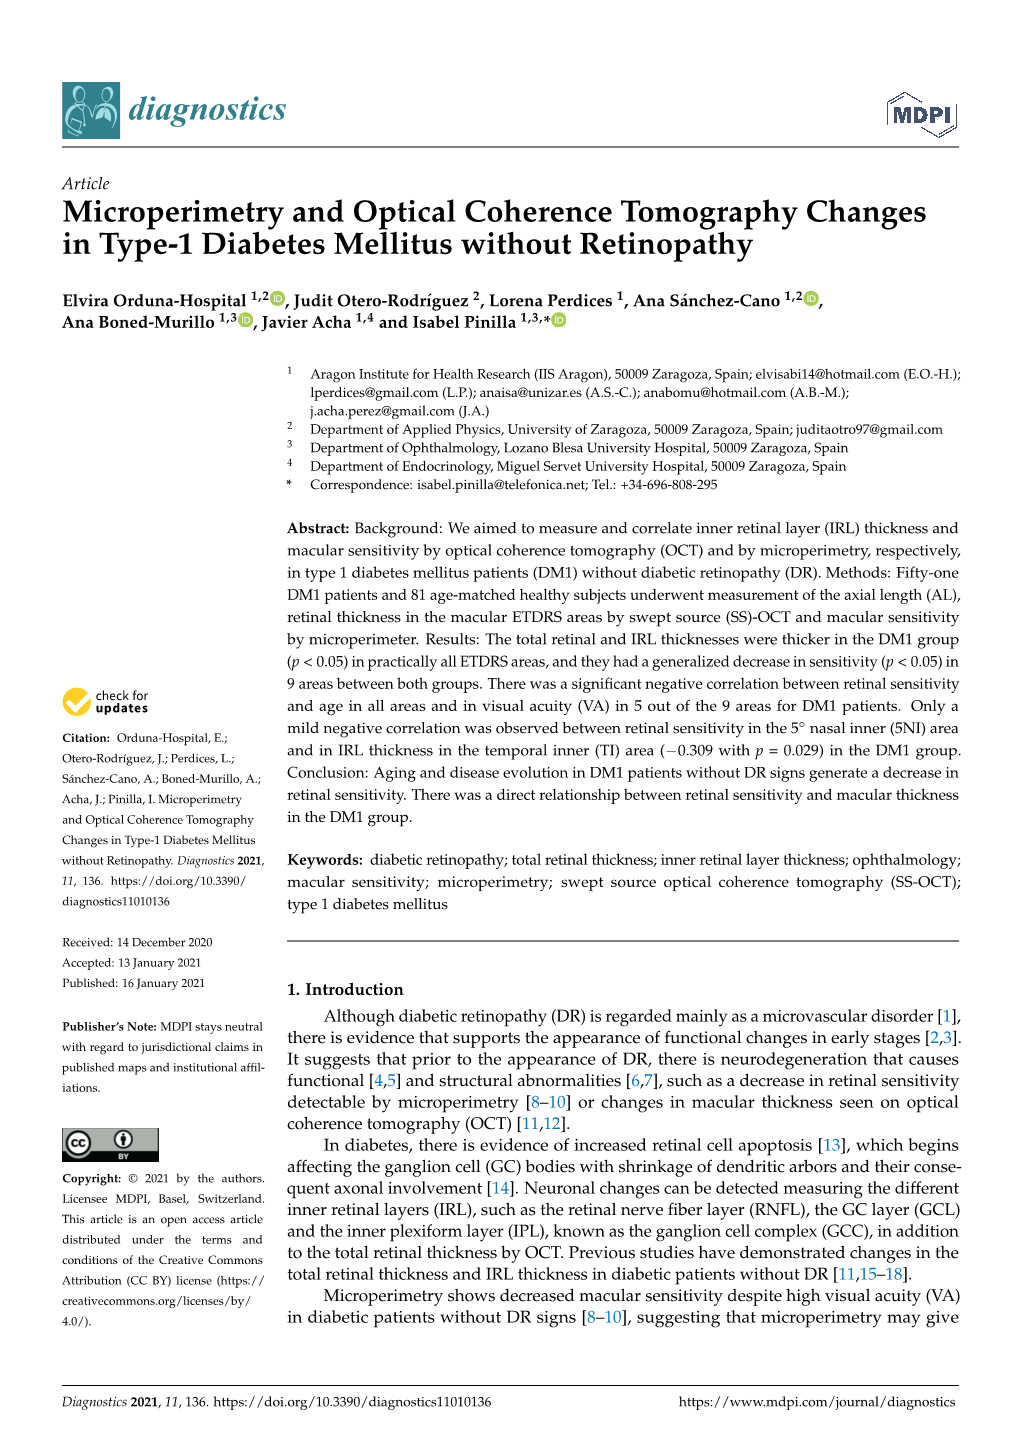 Microperimetry and Optical Coherence Tomography Changes in Type-1 Diabetes Mellitus Without Retinopathy